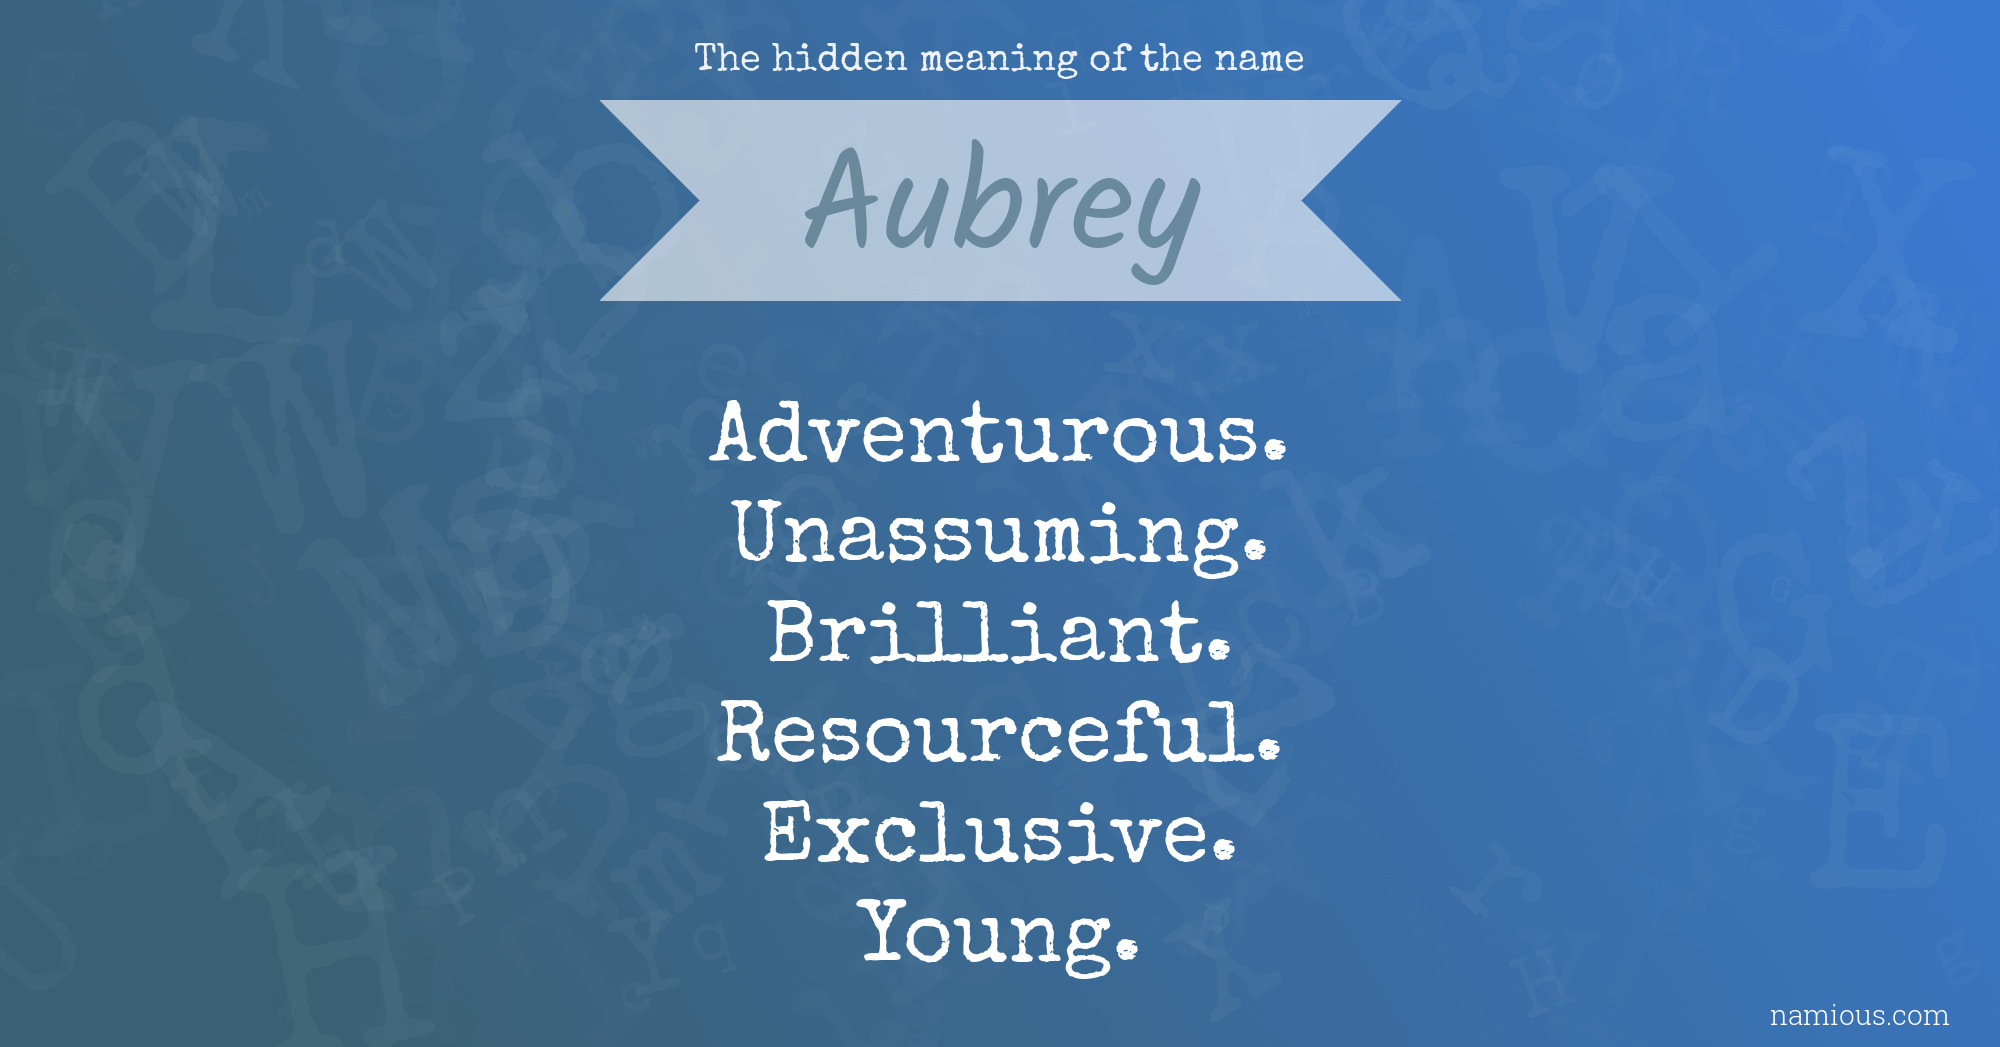 The hidden meaning of the name Aubrey